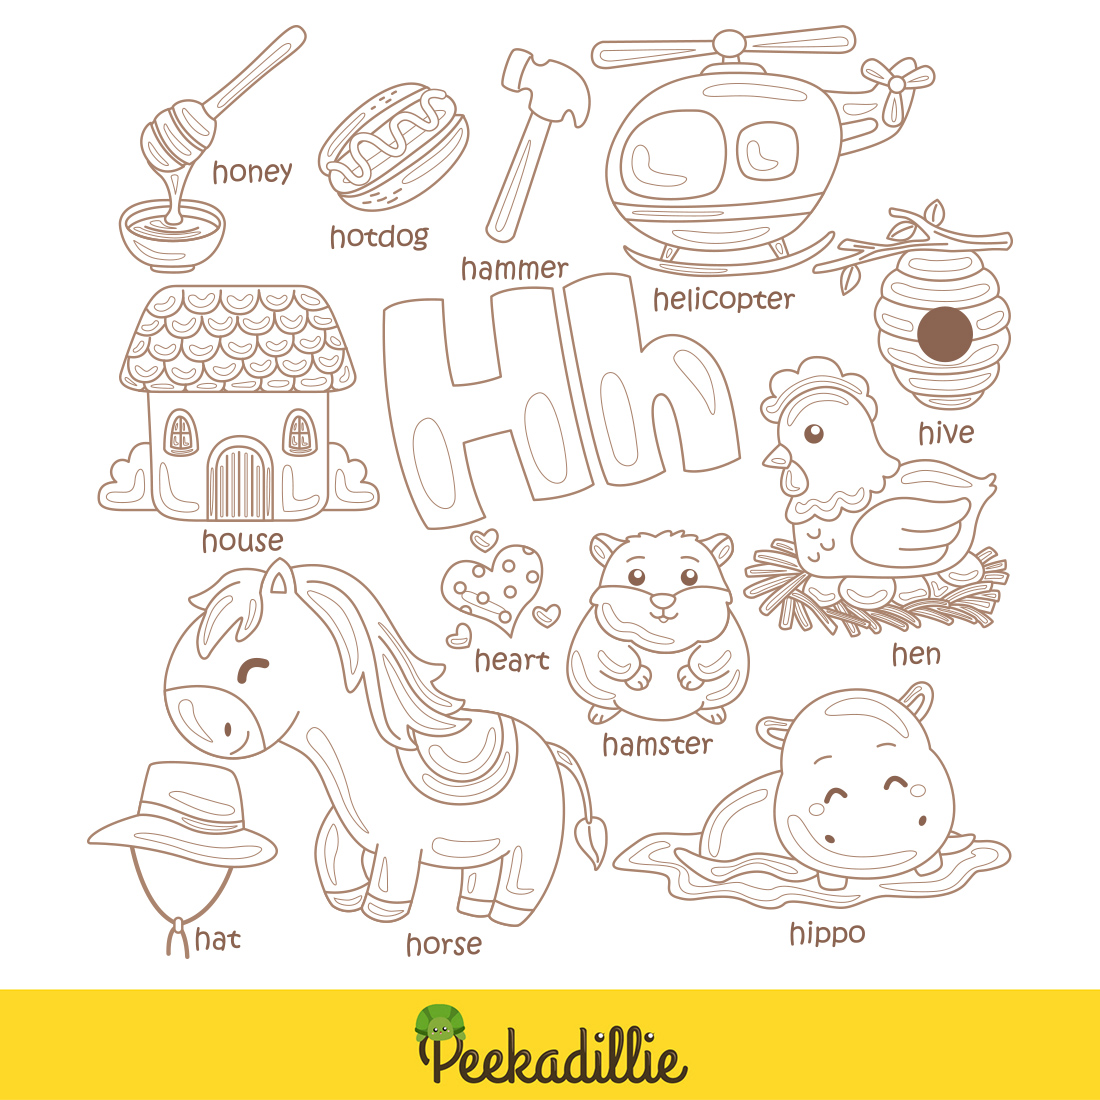 Alphabet H For Vocabulary School Letter Reading Writing Font Study Learning Student Toodler Kids Hive Hamster Heart Honey Horse House Hat Hotdog Hippo Helicopter Hen Cartoon Digital Stamp Outline preview image.